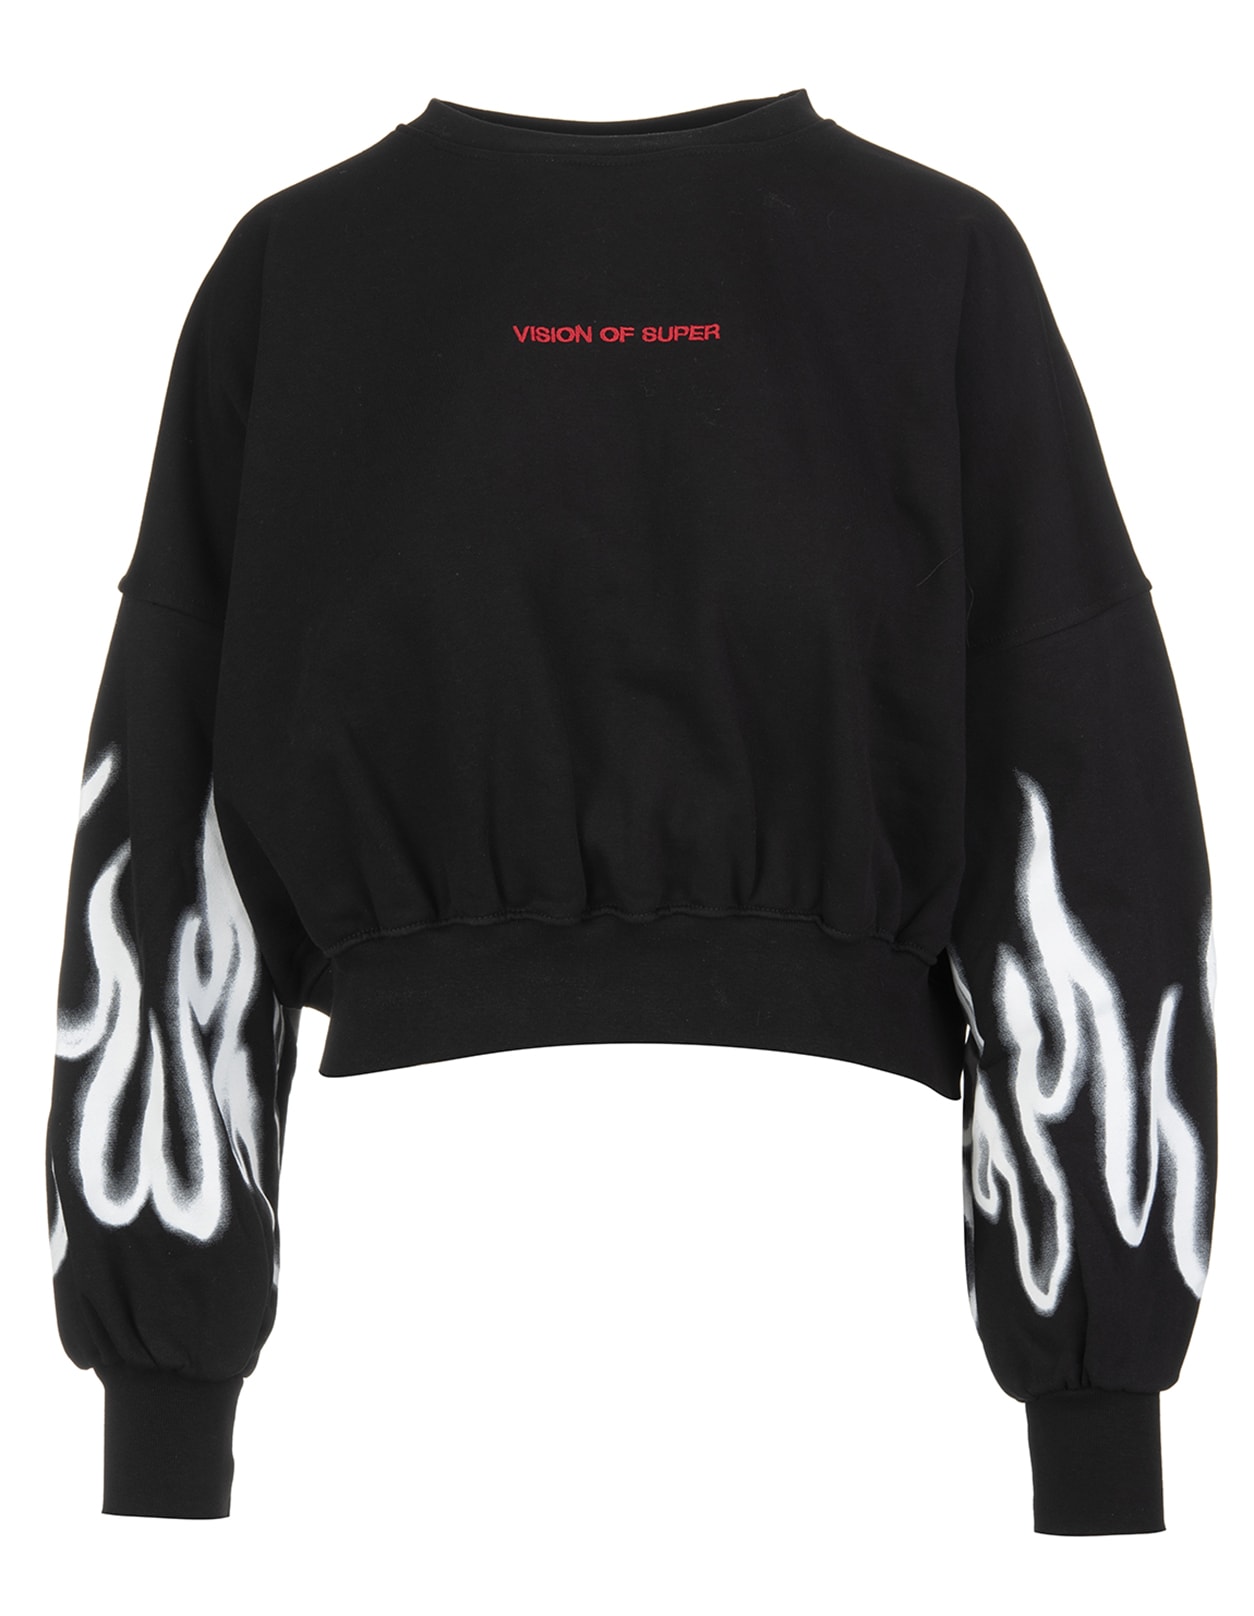 Vision of Super Woman Black Sweatshirt With White Spray Flames